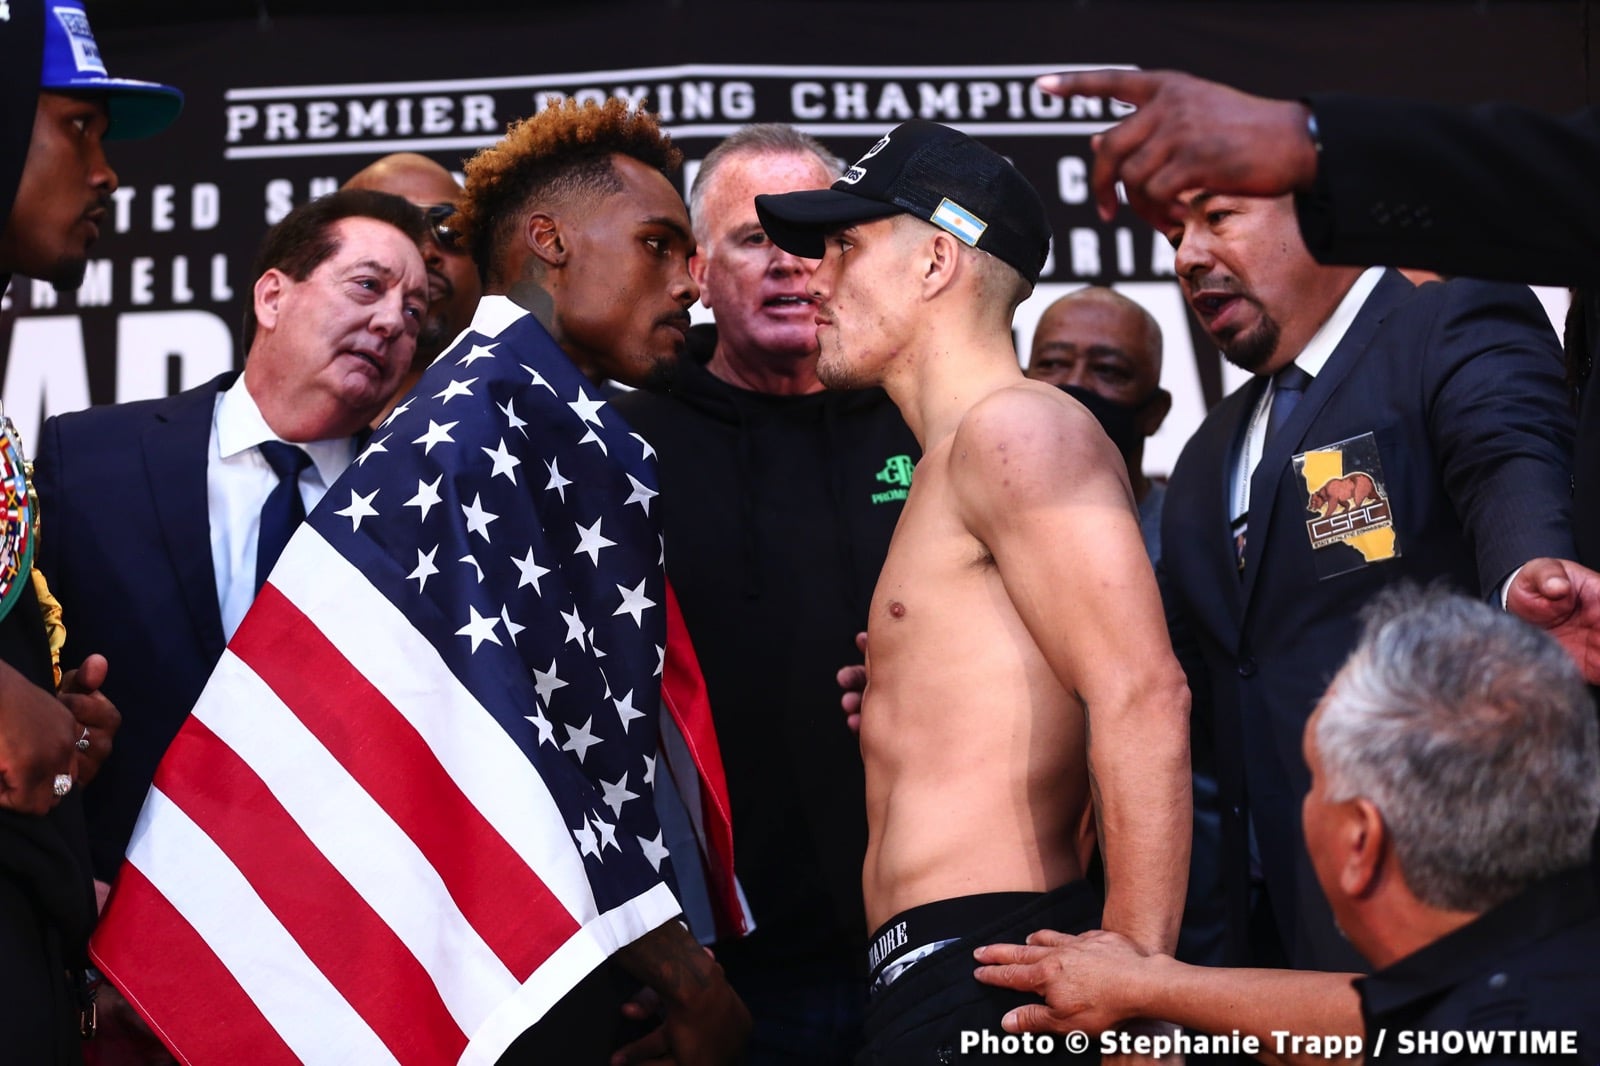 Image: Jermell Charlo 152.75 vs. Brian Castano 153.75 - weigh-in results